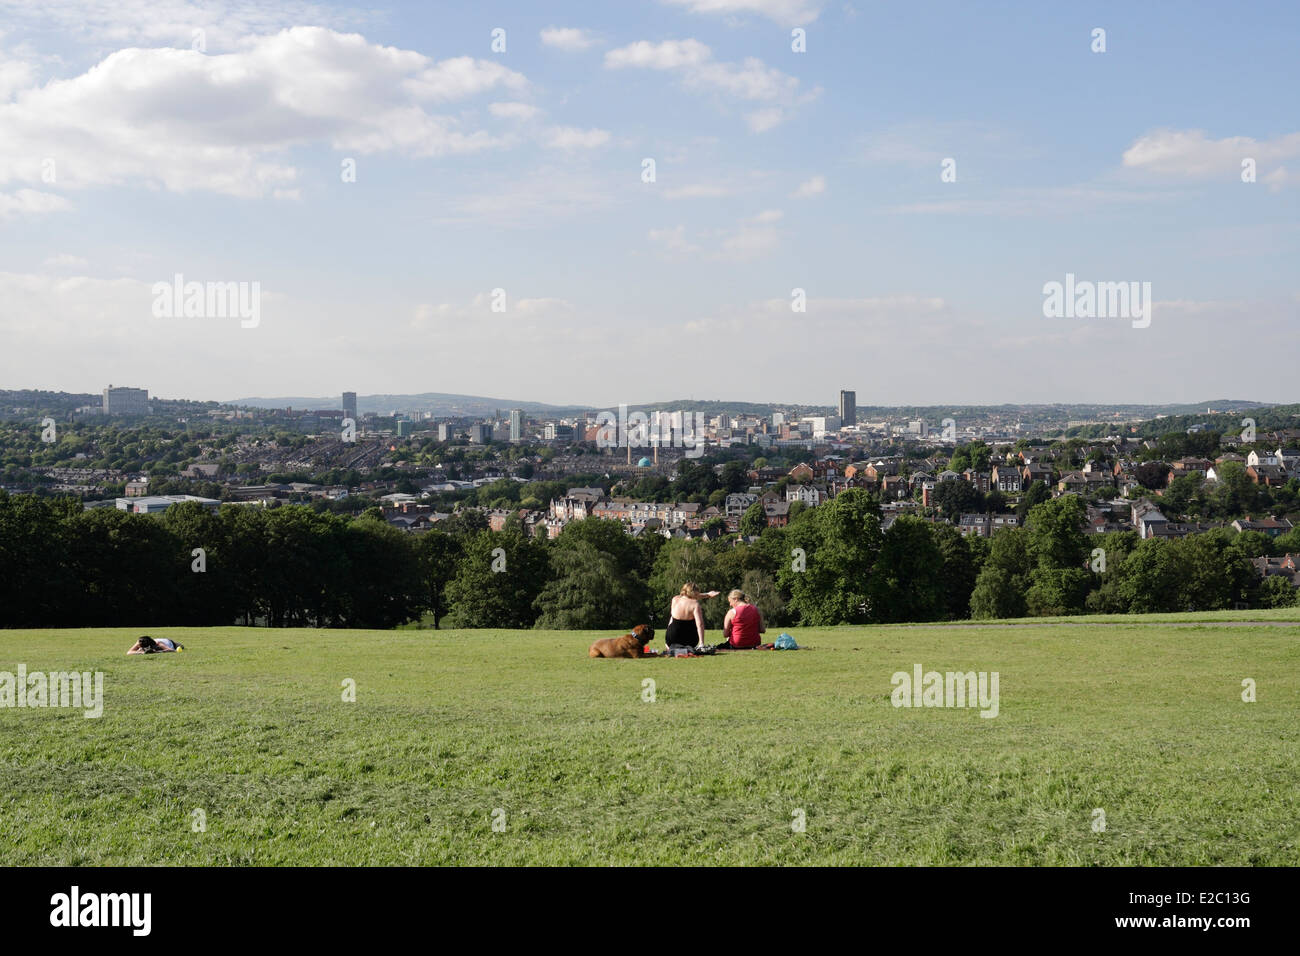 People enjoying the view of Sheffield city skyline England UK from Meersbrook Park Scenic view English urban landscape Greenest city Stock Photo